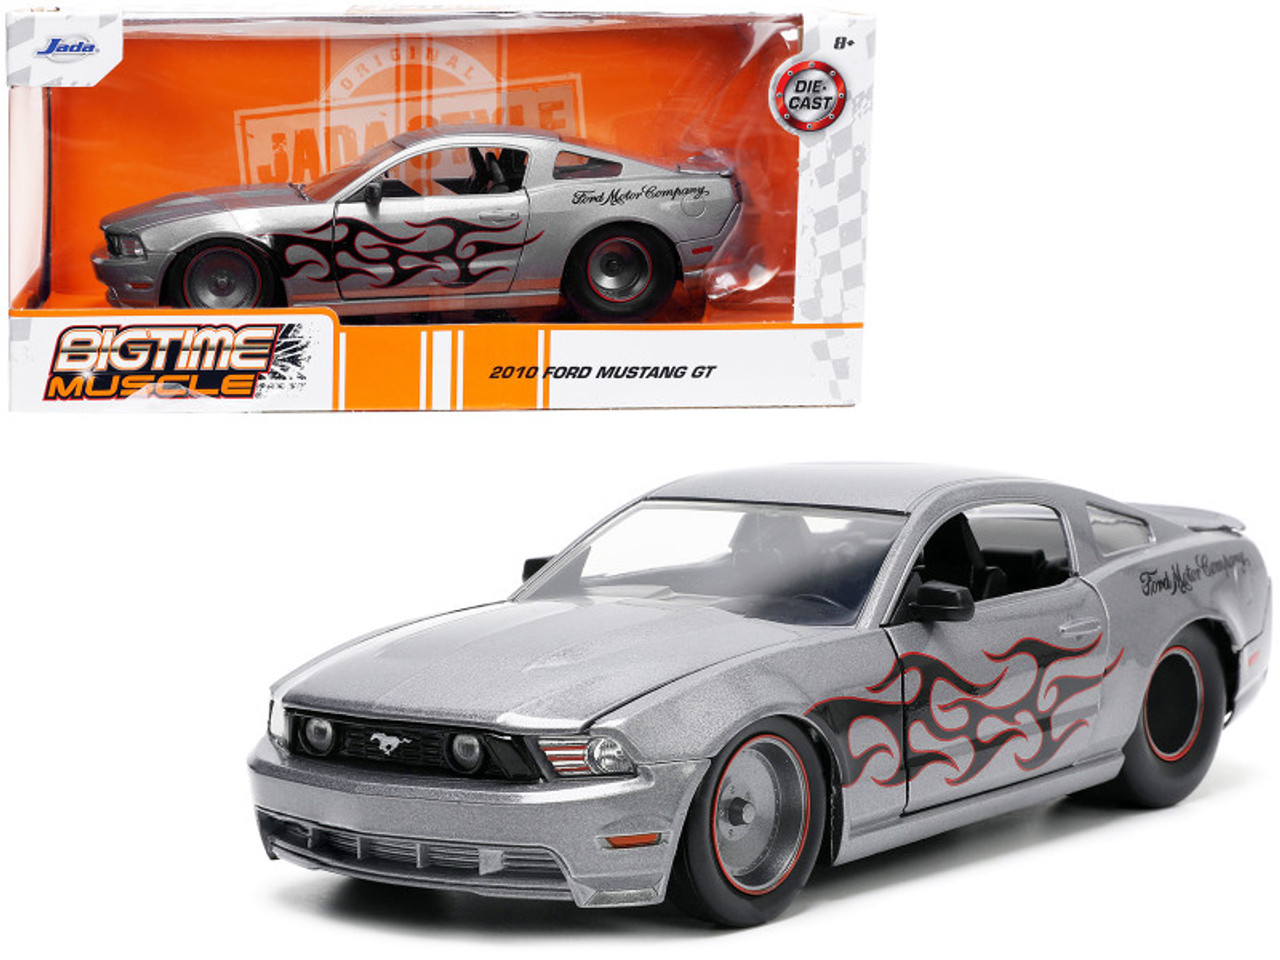 1/24 Jada 2010 Ford Mustang GT (Gray Metallic with Flames) "Ford Motor Company" "Bigtime Muscle" Series Diecast Car Model